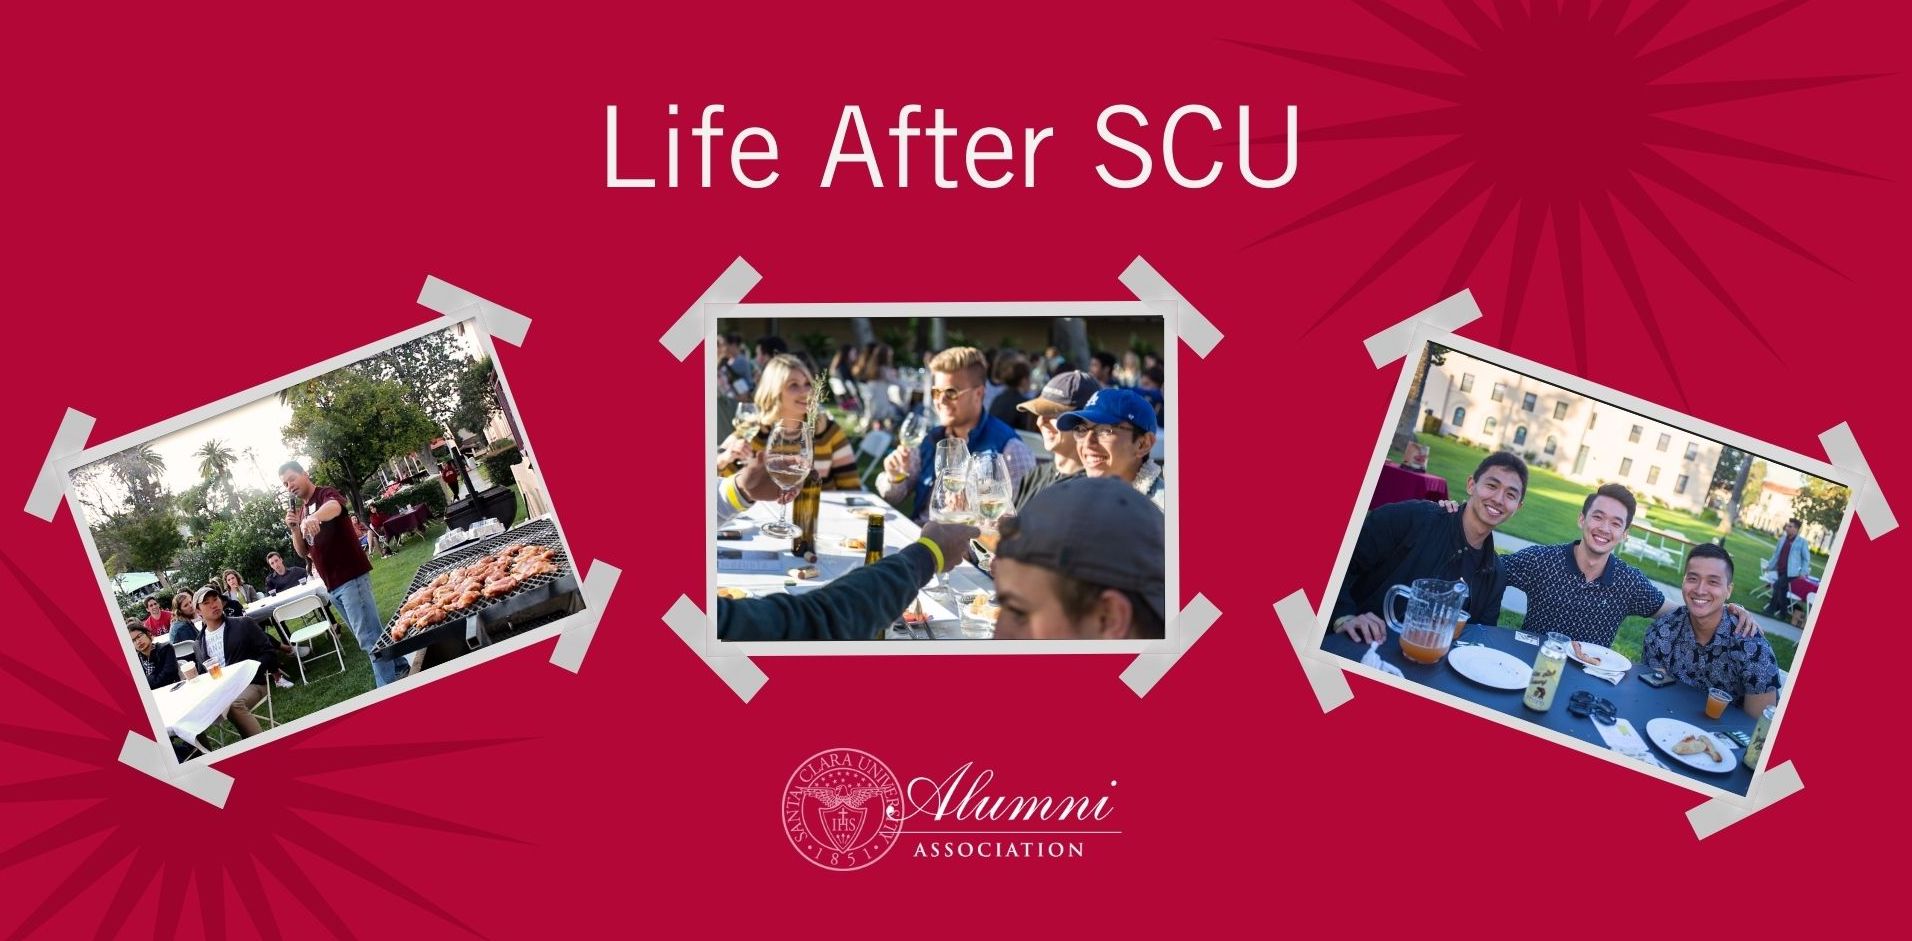 A flyer which has the text Life After SCU with some alumni images